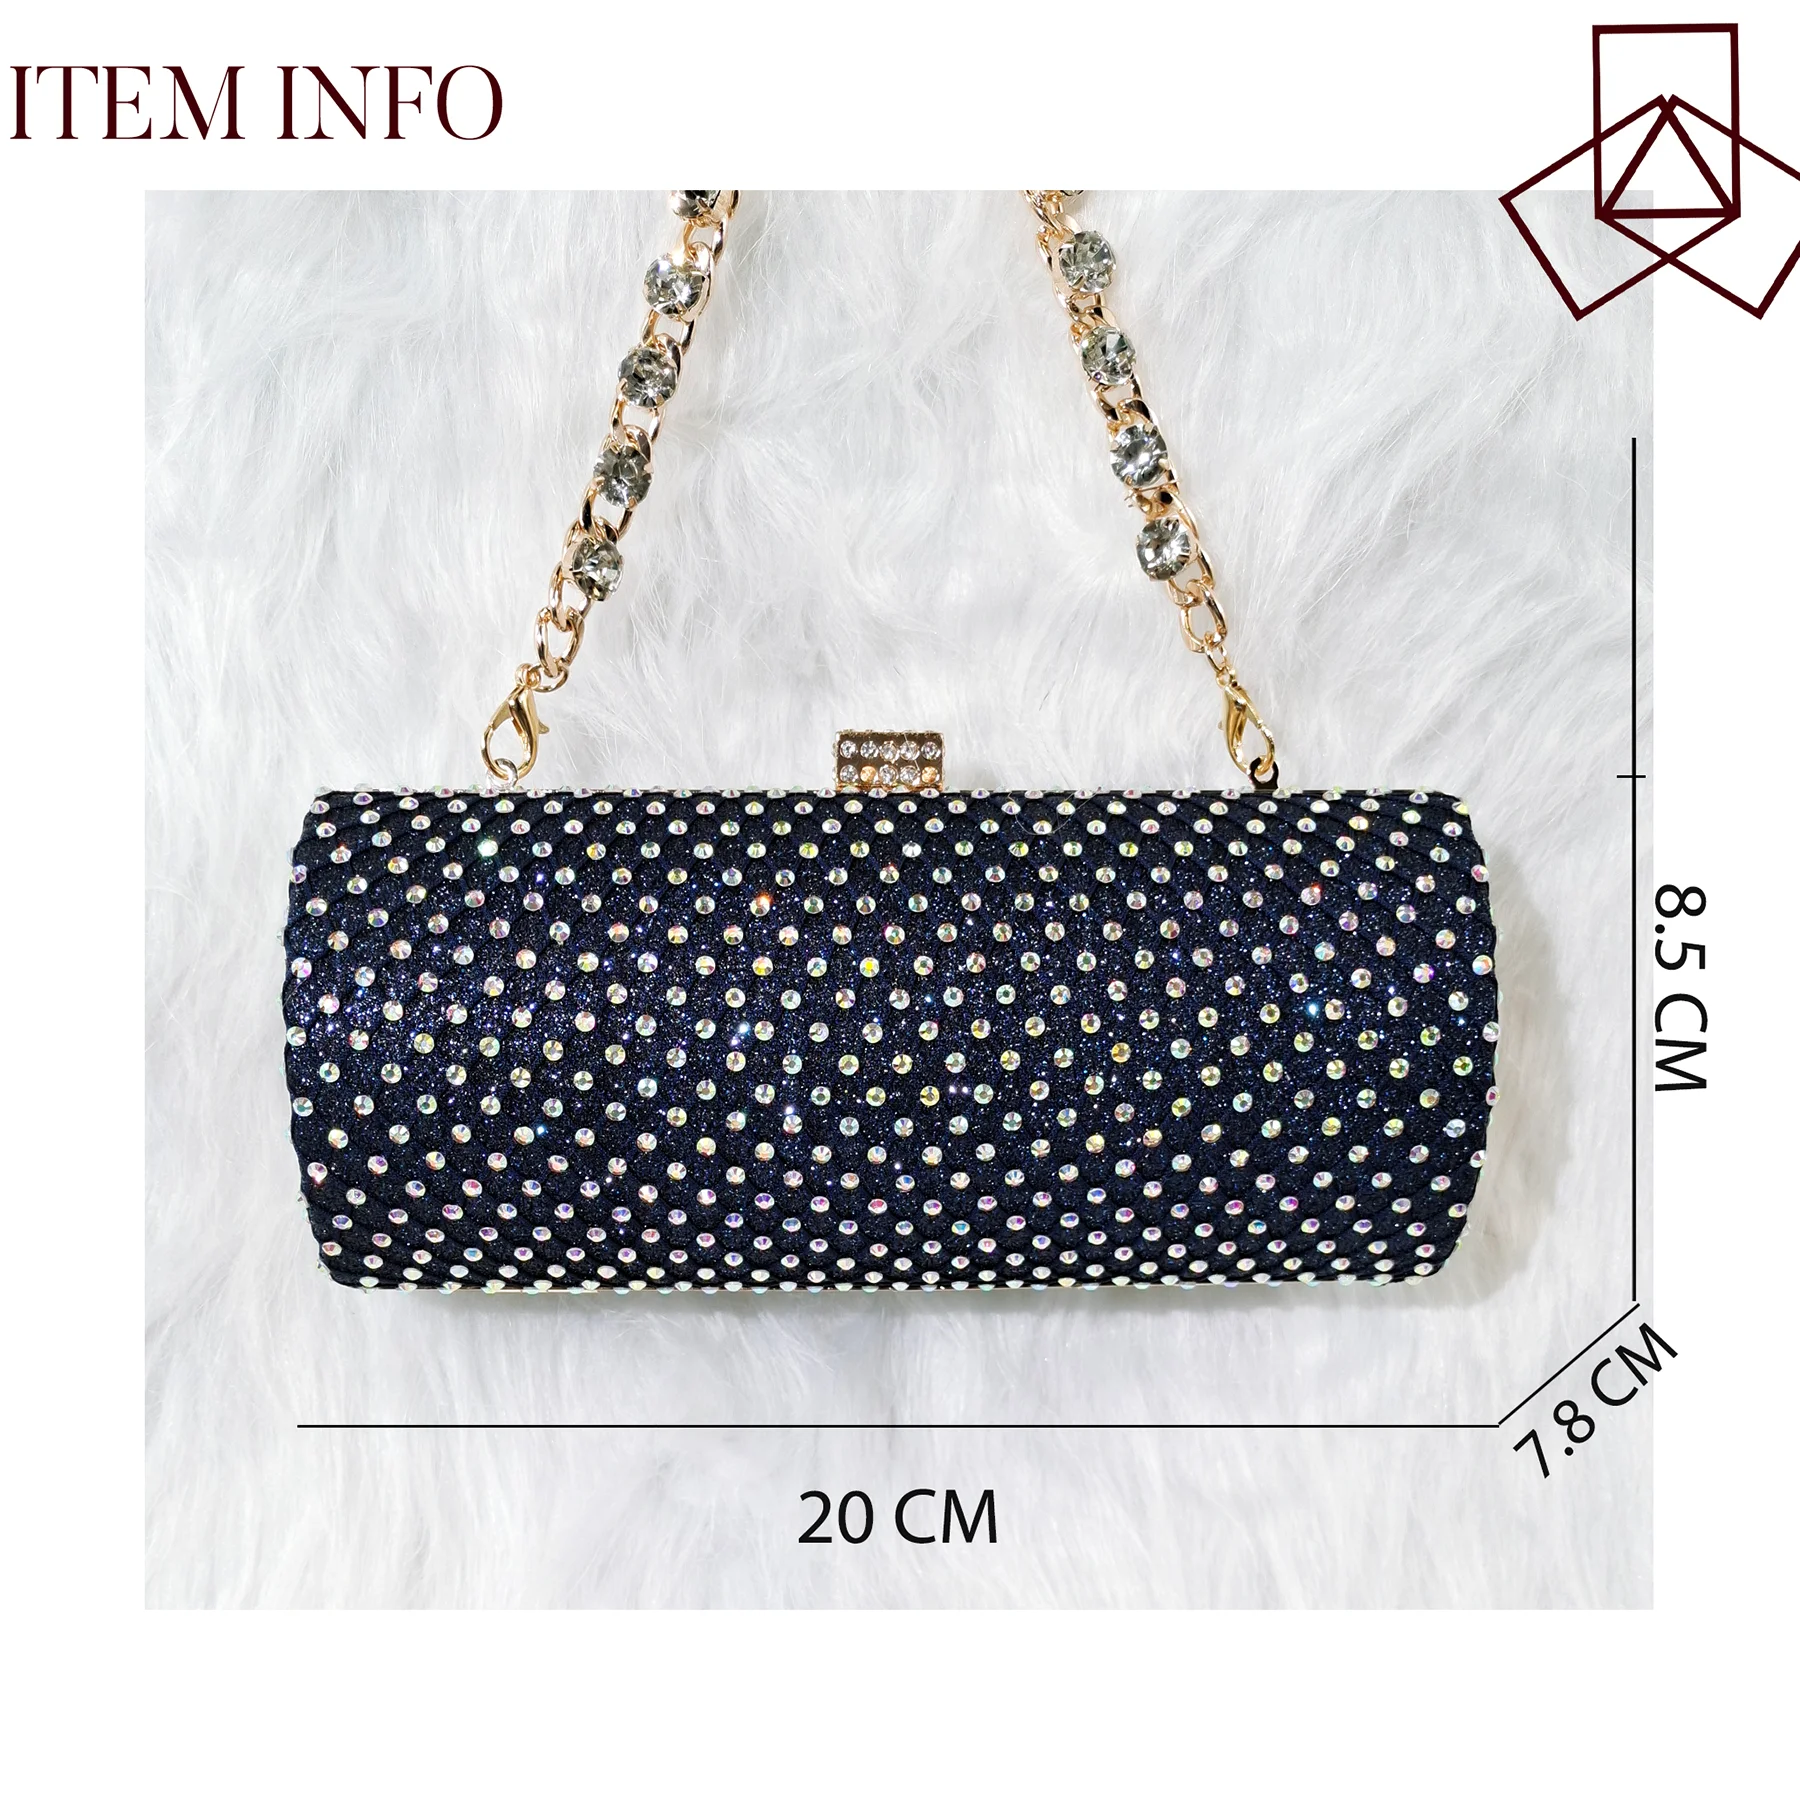 

QSGFC Navy Blue Color Crystal Mesh Round Hard Bag Evening Clutch Girly Fashion Small Bag Long Shoulder Strap Two-Way Bag